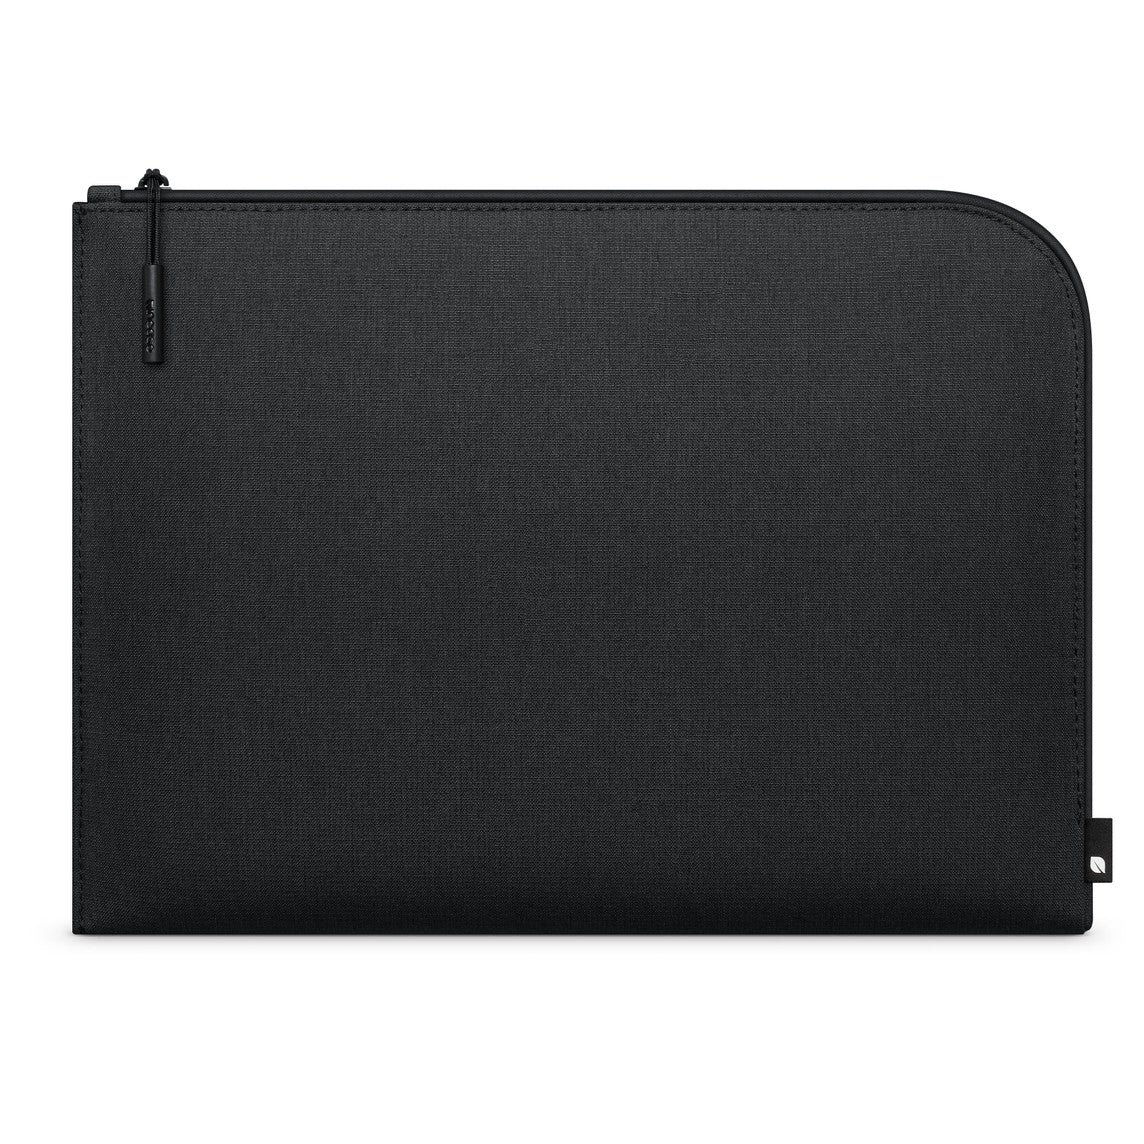 Incase Facet Sleeve Case for 13-inch MacBook Air and MacBook Pro Black